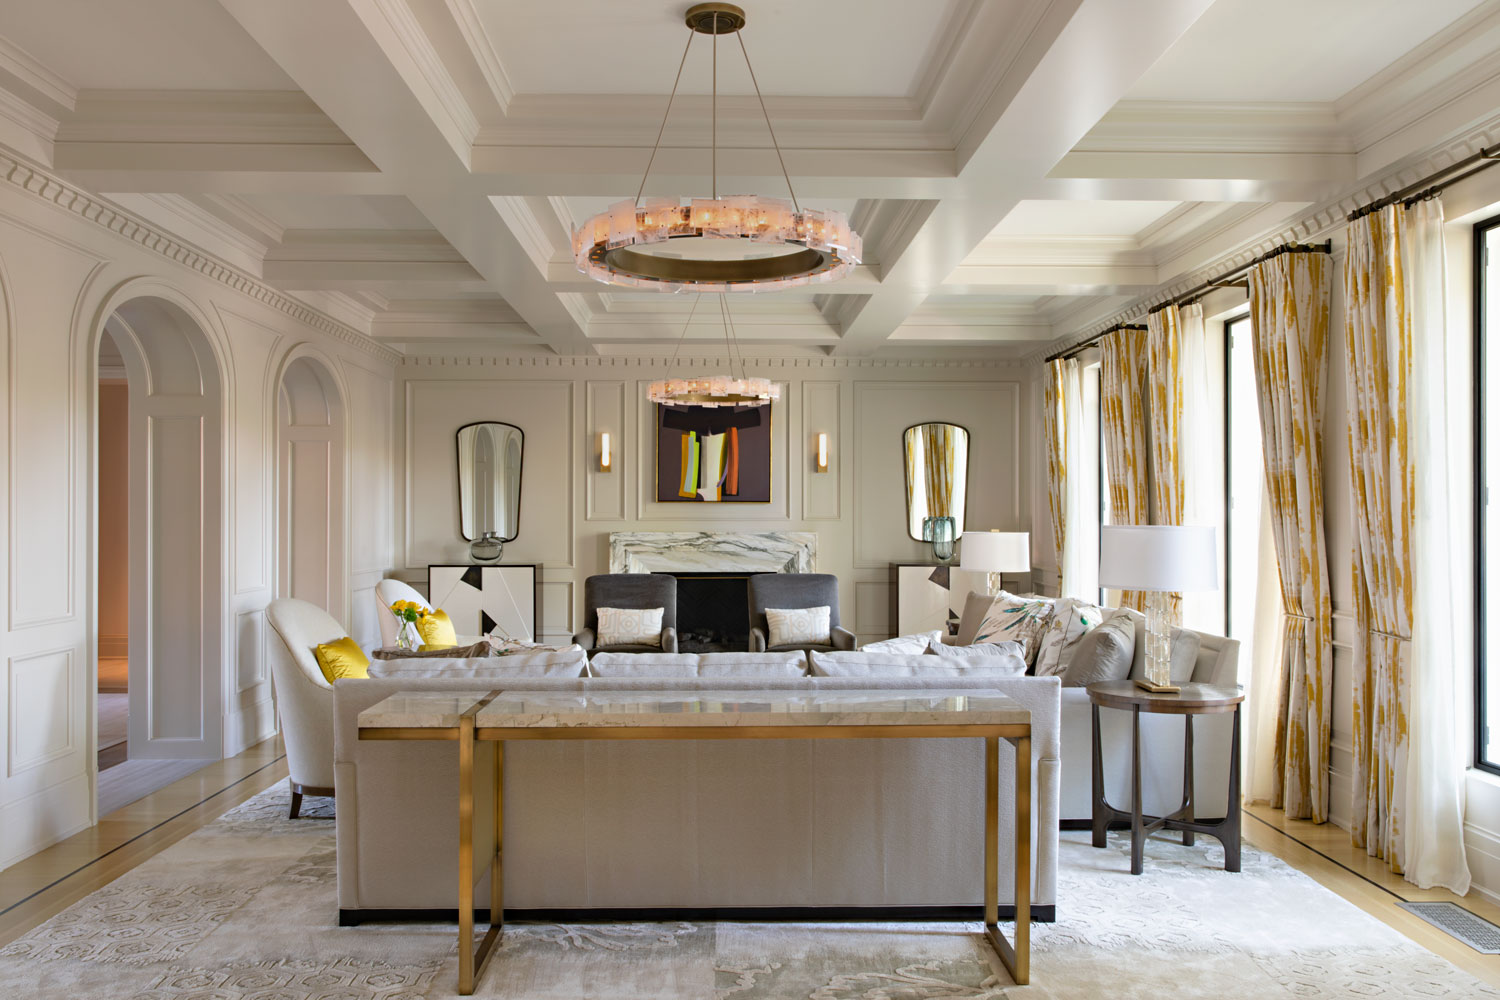 05-coffered-ceiling-paneled-walls-marble-surround-fireplace-gary-drake-general-contractor.jpg